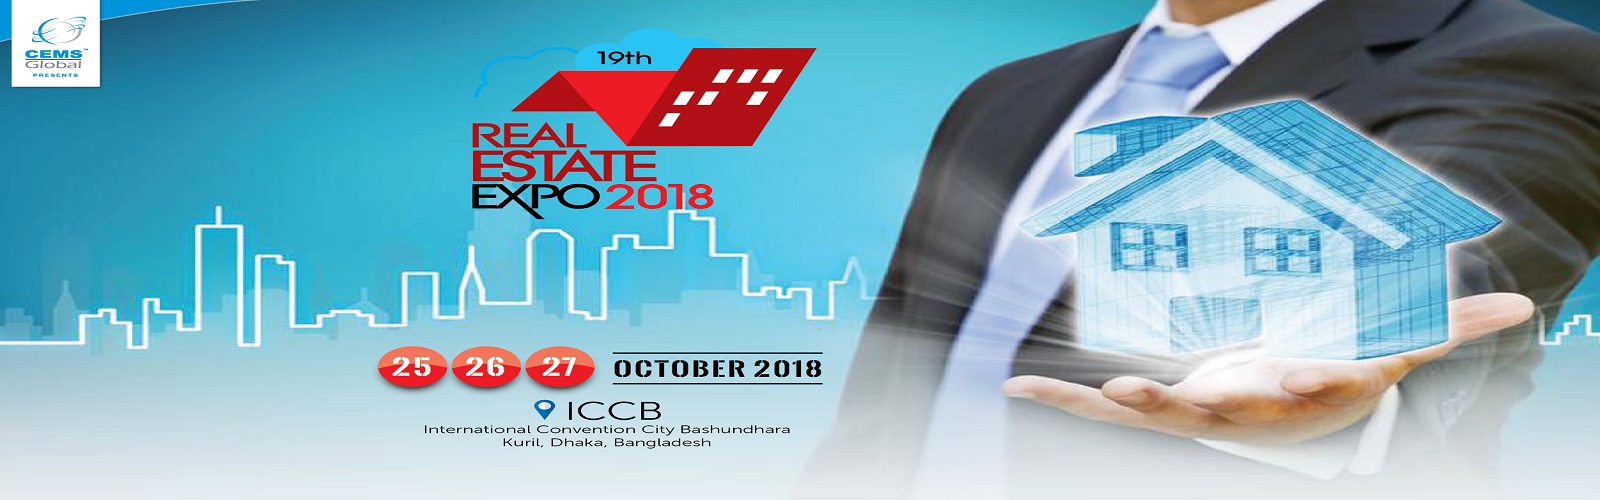  19th Real Estate Expo 2018